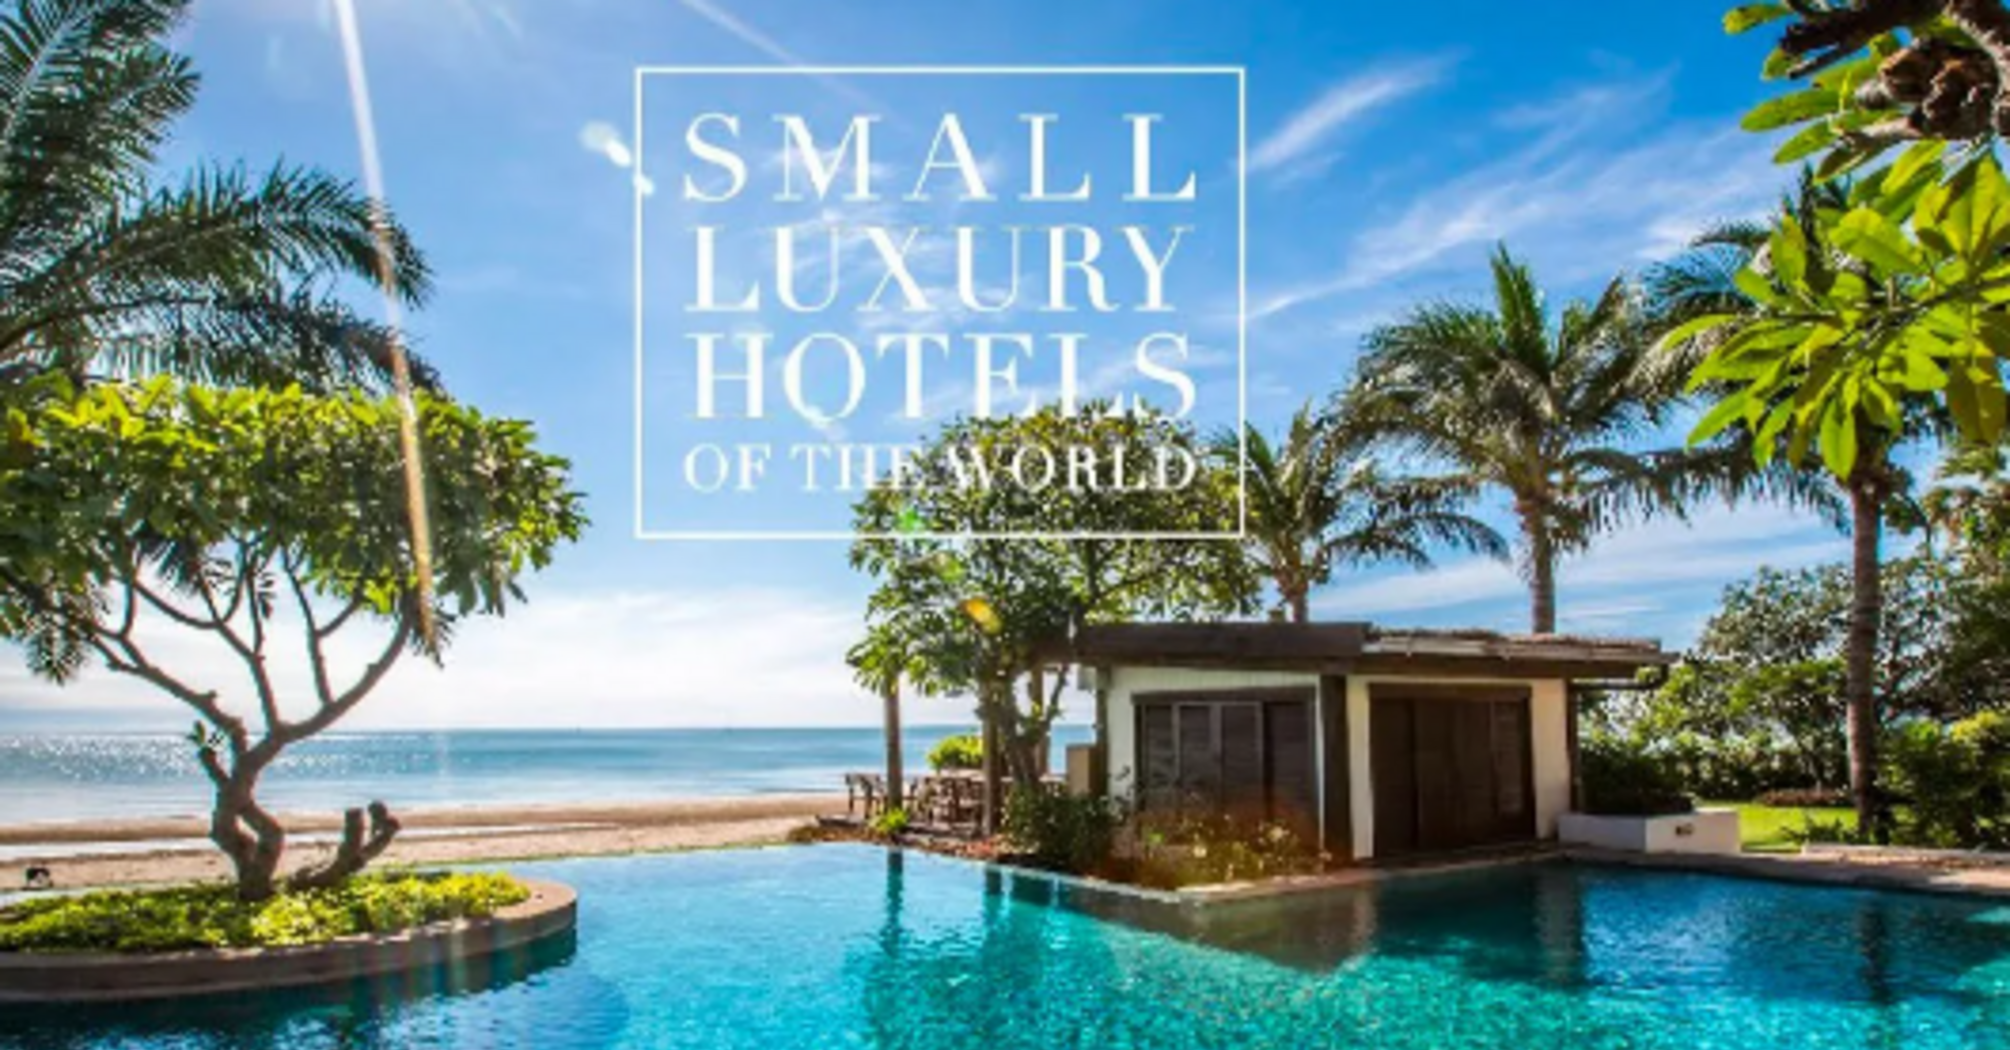 Comapinha Small Luxury Hotels of the World